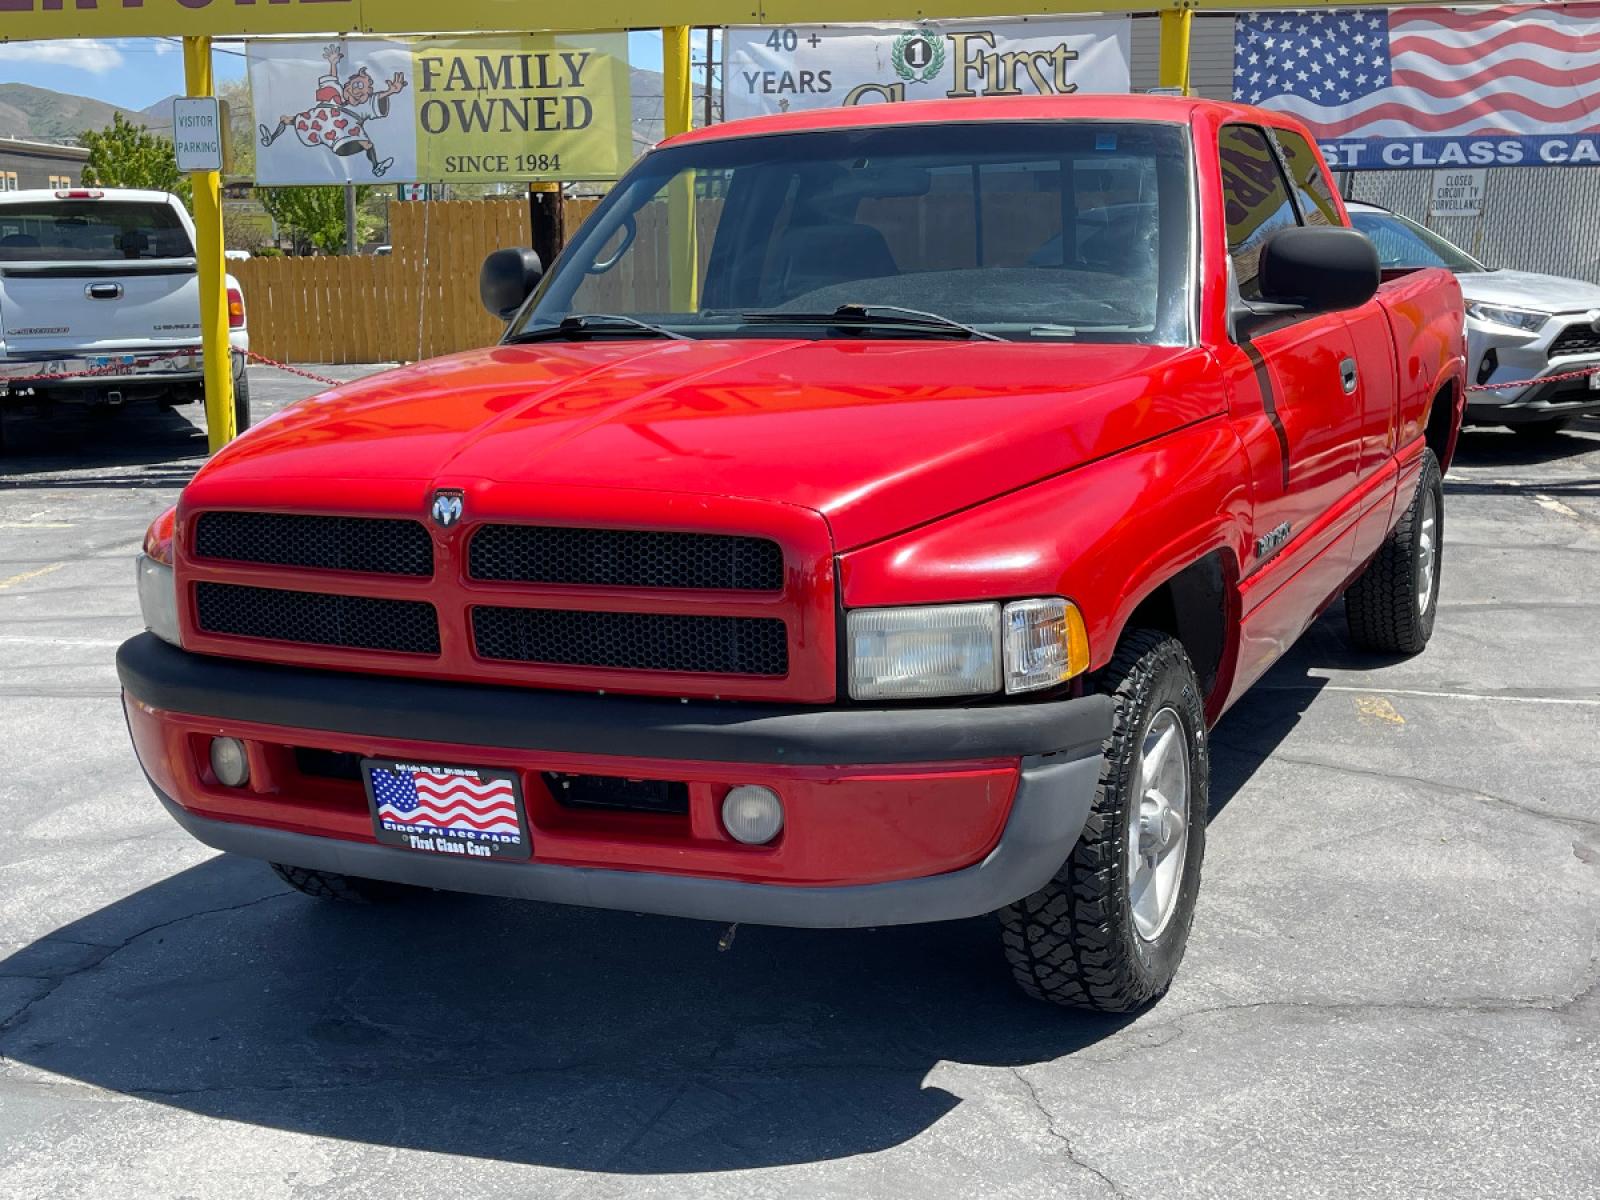 1998 Flame Red /Gray Cloth Dodge Ram 1500 Sport Quad Cab (3B7HC13Y4WG) with an 5.2L V8 engine, Automatic transmission, located at 801 South State Street, Salt Lake City, UT, 84111, (801) 328-0098, 40.751953, -111.888206 - Life is crazy. Now is the time to buy! All of our prices are just dollars above our cost. These prices will change as soon as life isn't so crazy. So please call or come in. We are here to save you a lot of money! Our service department is OPEN DAILY to help with any of your service need - Photo #2